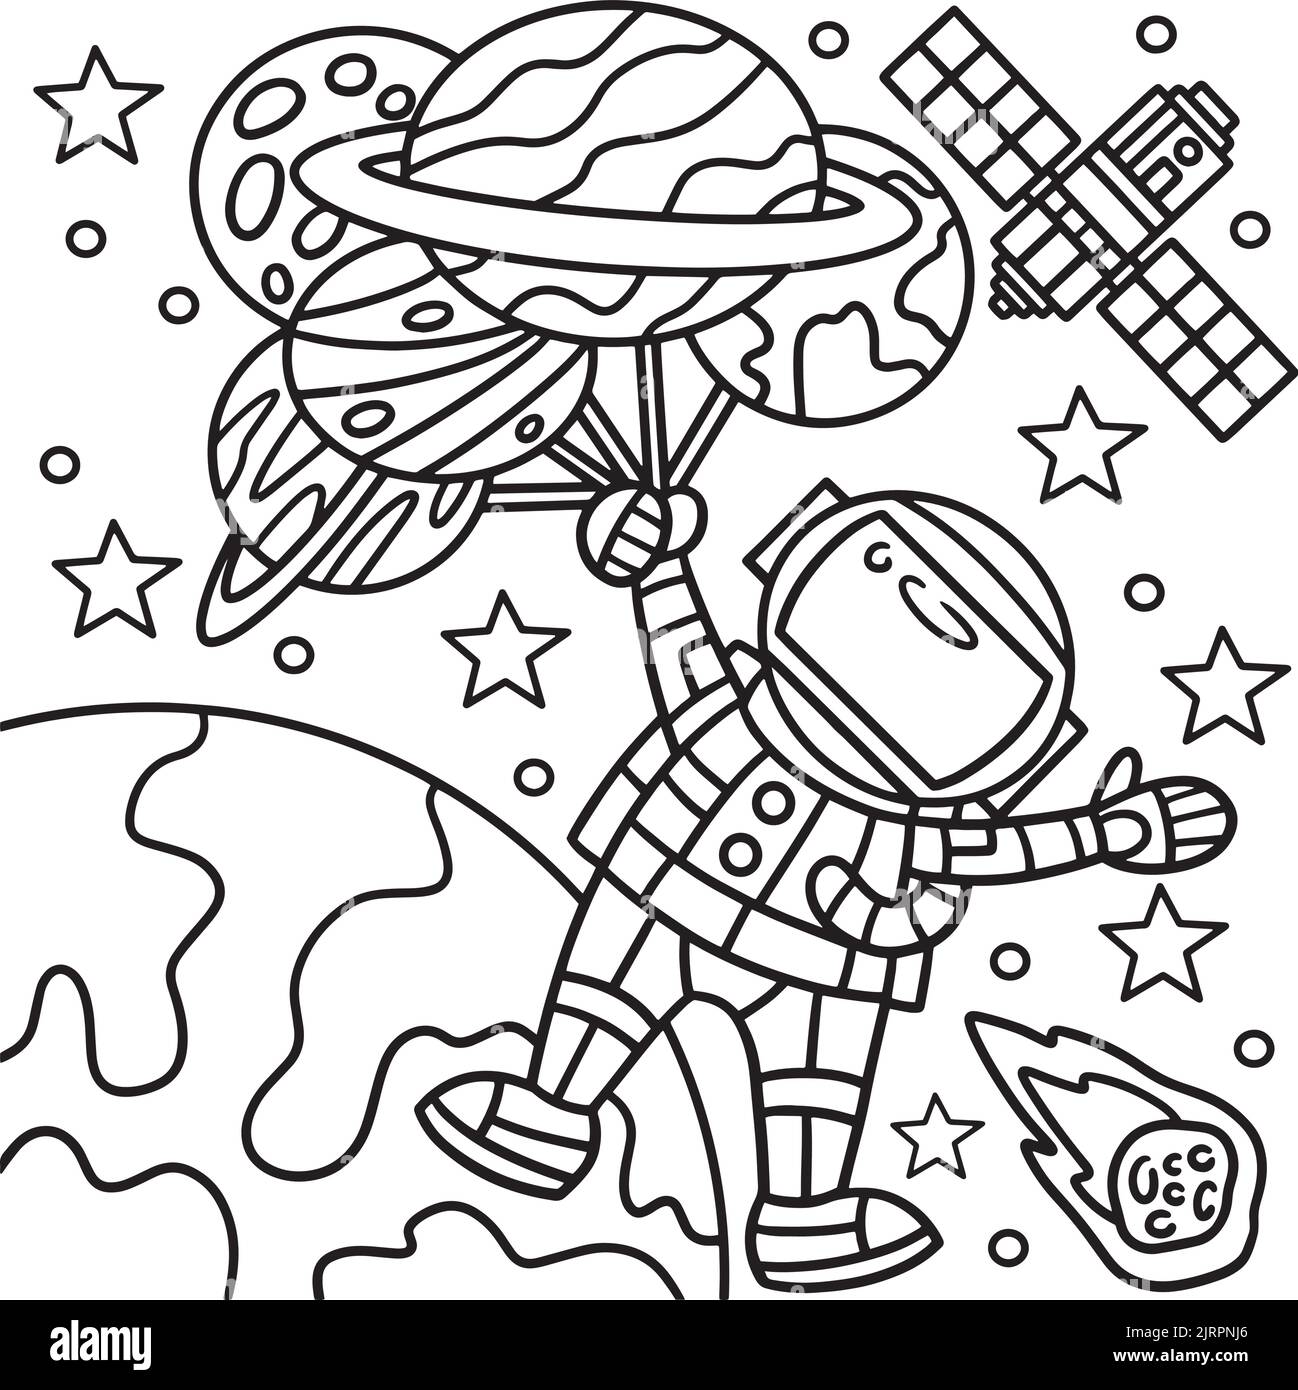 Astronaut Holding Balloon Planet Coloring Page Stock Vektor